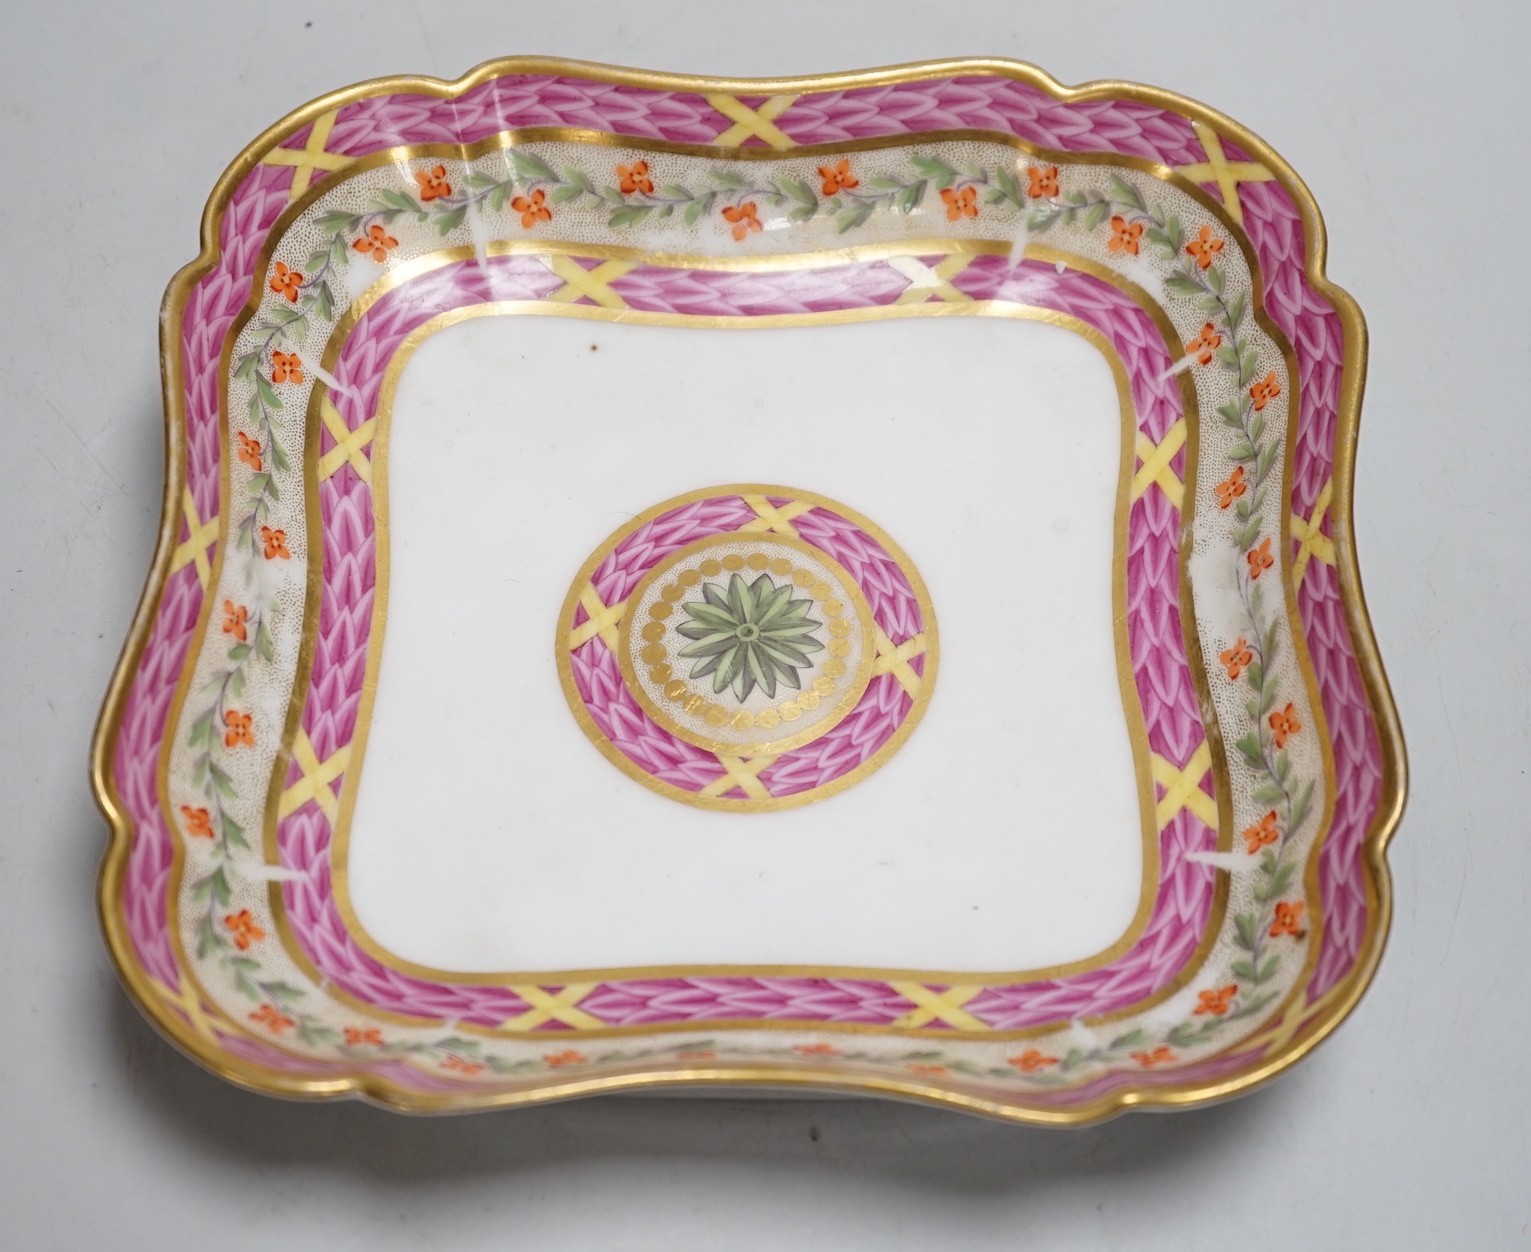 An 18th century Rue Thiroux square shaped dish painted with two bands of pink leaves, and a band of flowers above a central roundel, stencilled crown A mark in orange, the factory was also known as Porcelaines a la Reine